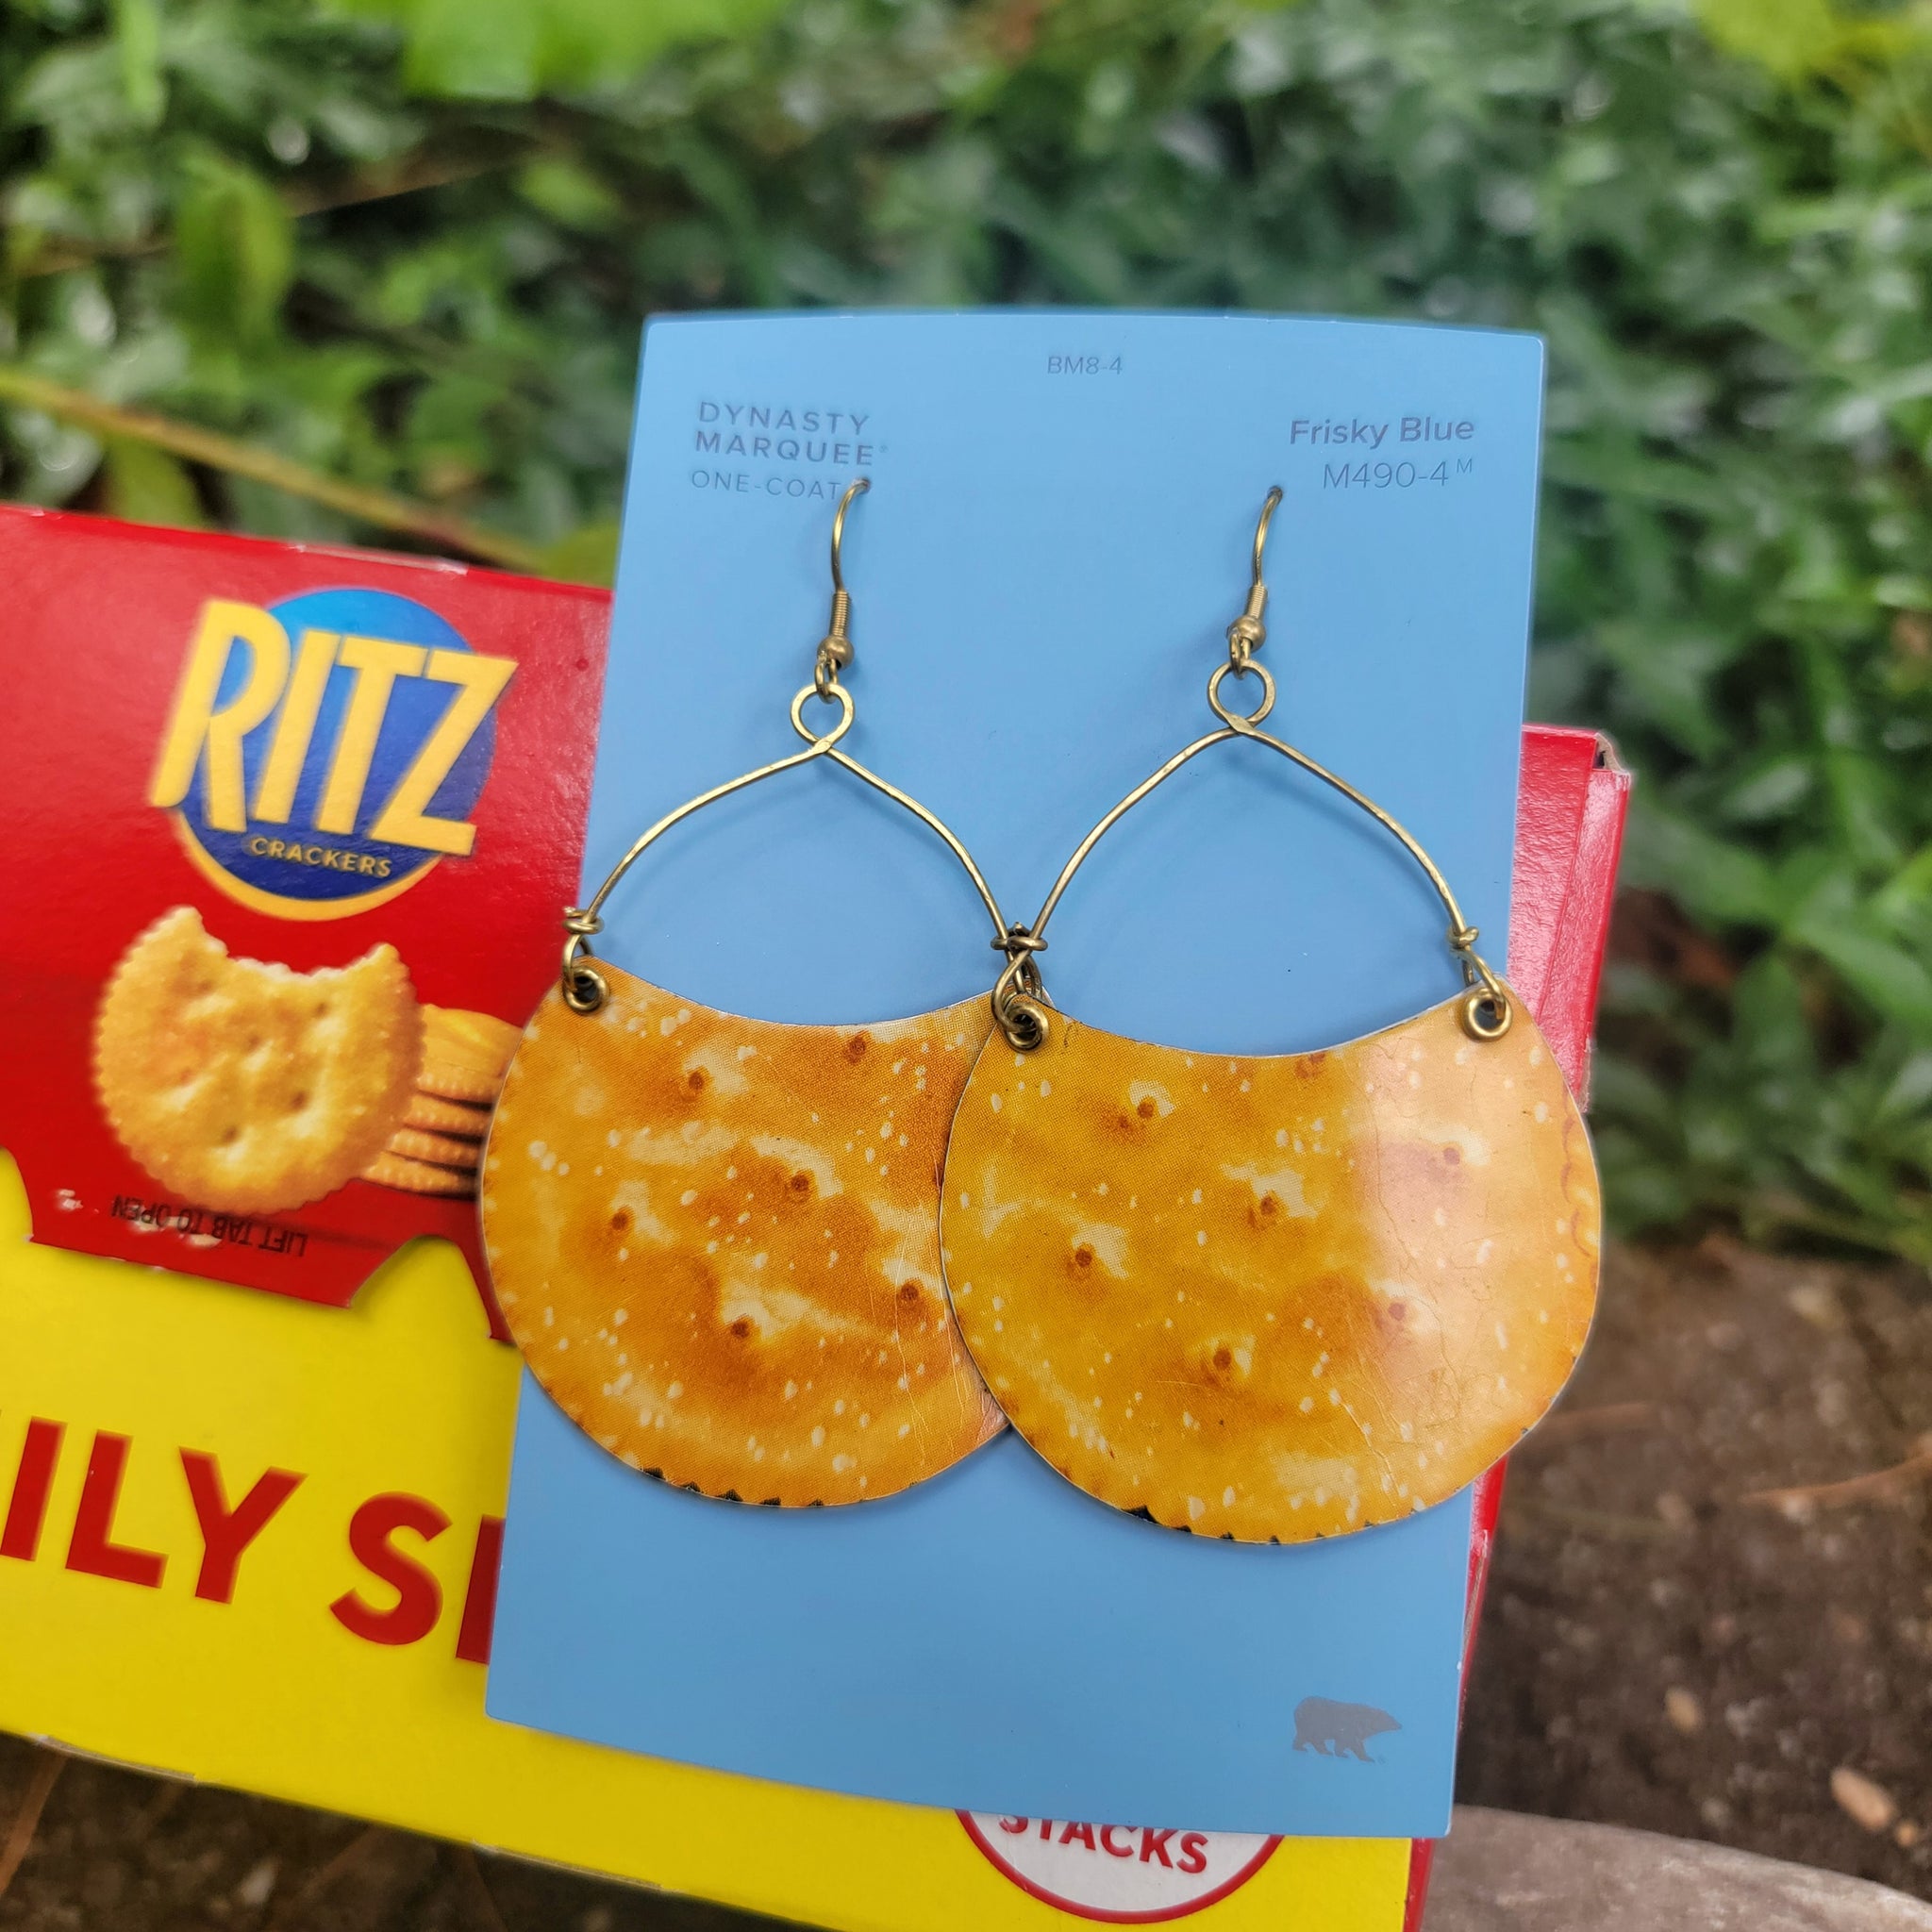 Cheese & Crackers Ritz Collection - Repurposed Vintage Tin Earrings